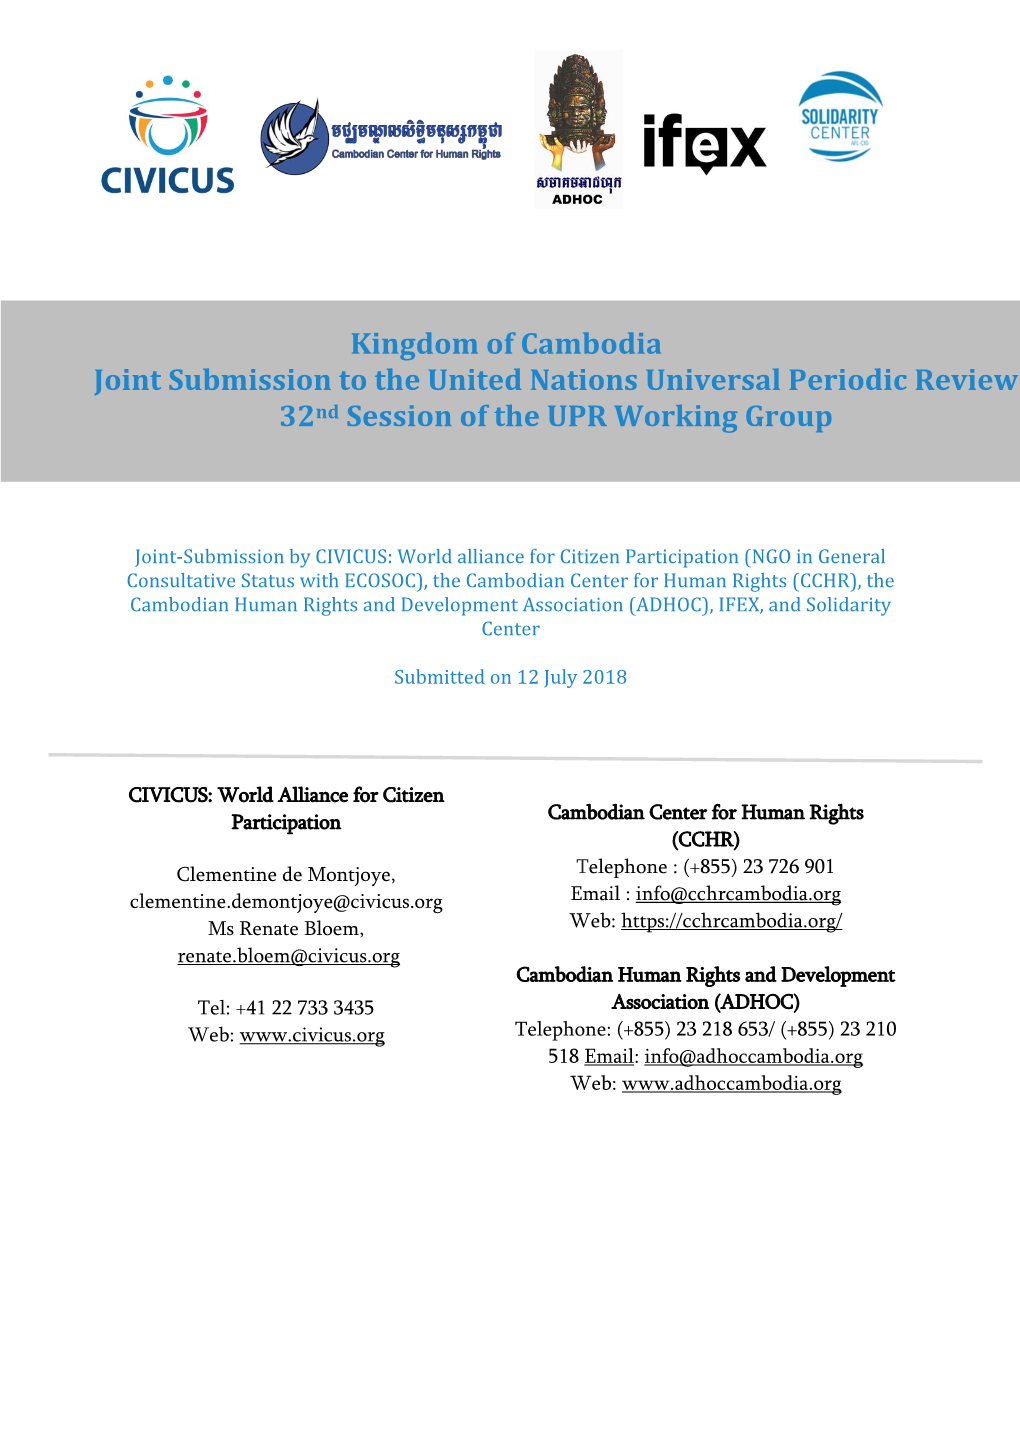 Kingdom of Cambodia Joint Submission to the United Nations Universal Periodic Review 32Nd Session of the UPR Working Group